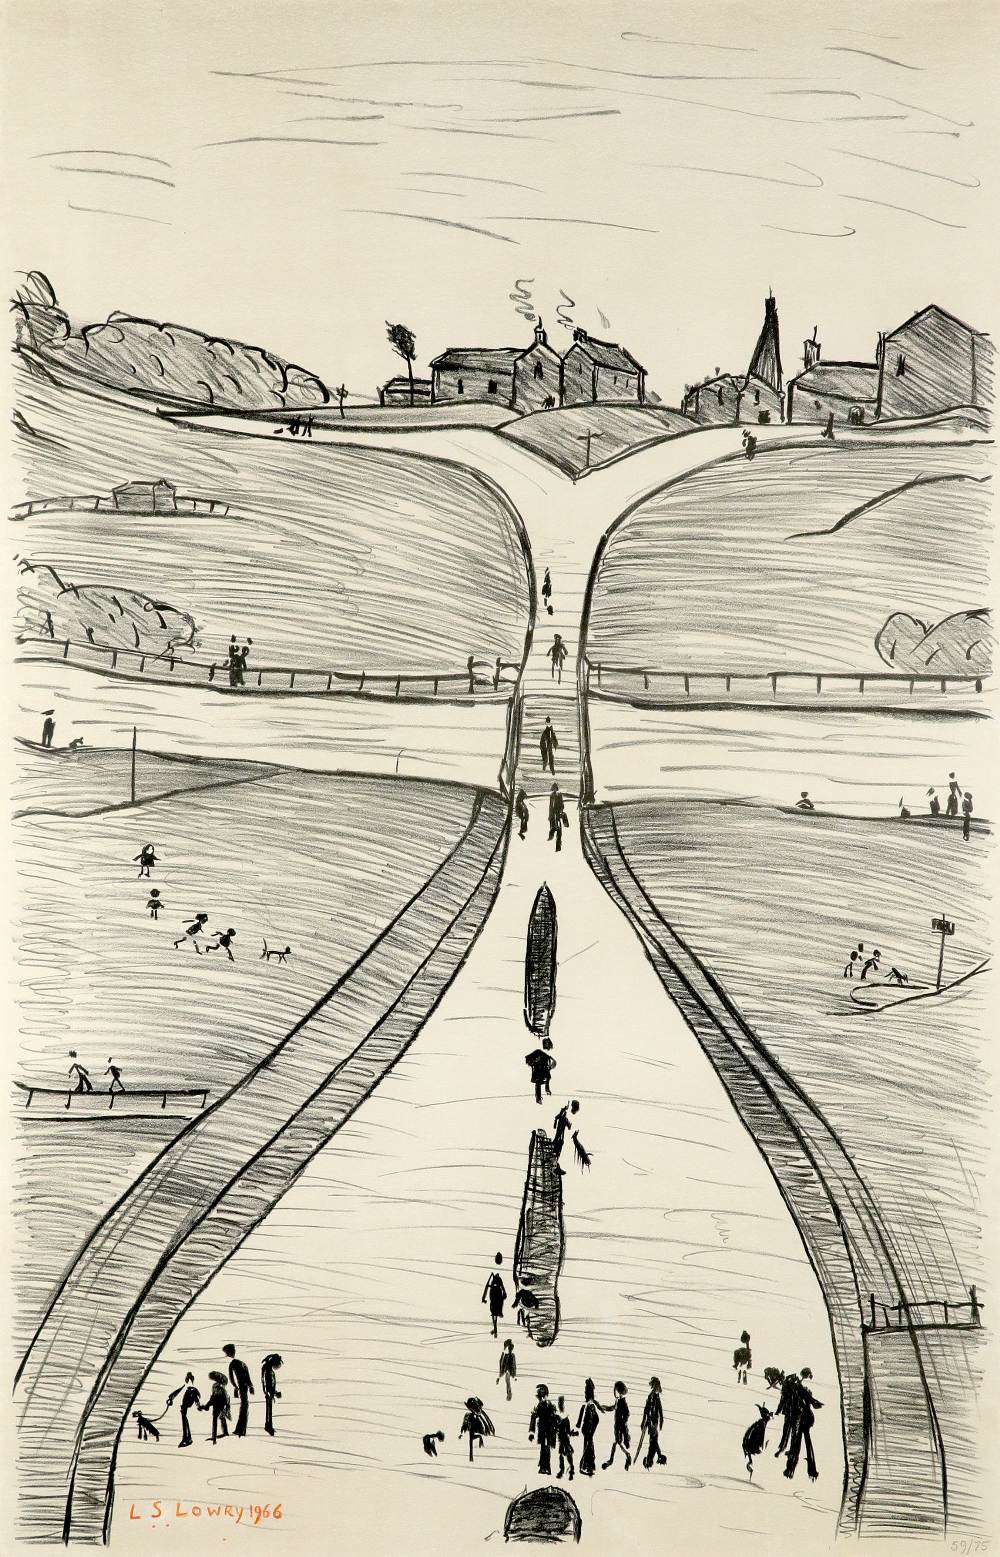 ‡Laurence Stephen Lowry RA, RBA (1887-1976) Village on a Hill Signed and dated L.S.LOWRY 1966 (in